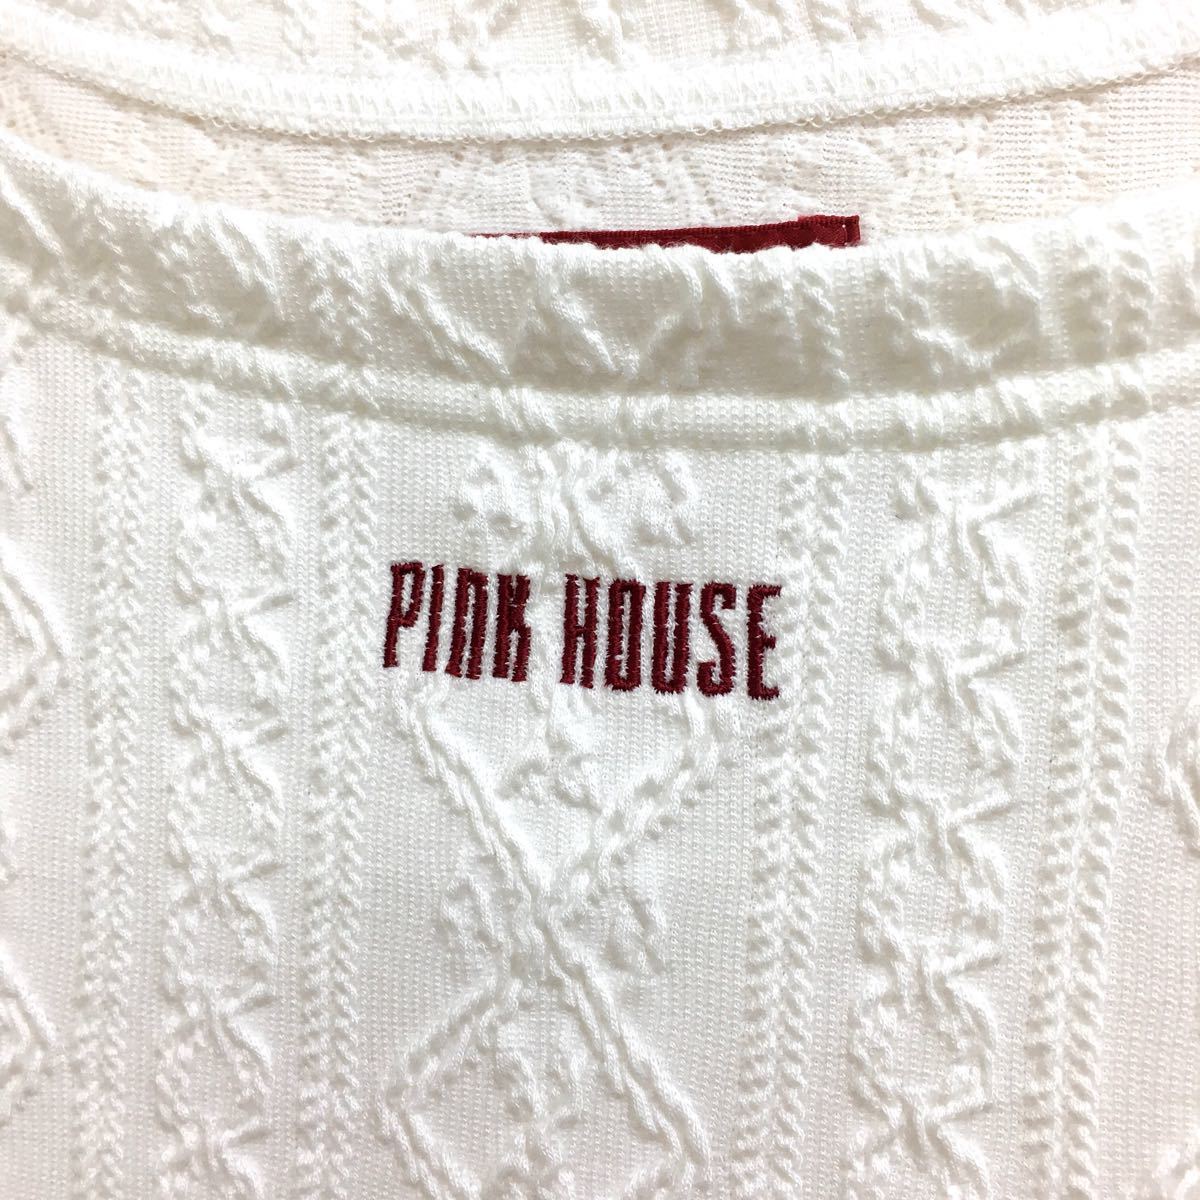 【PINK HOUSE】Tシャツ (M)カットソー  半袖　模様  ロゴ刺繍